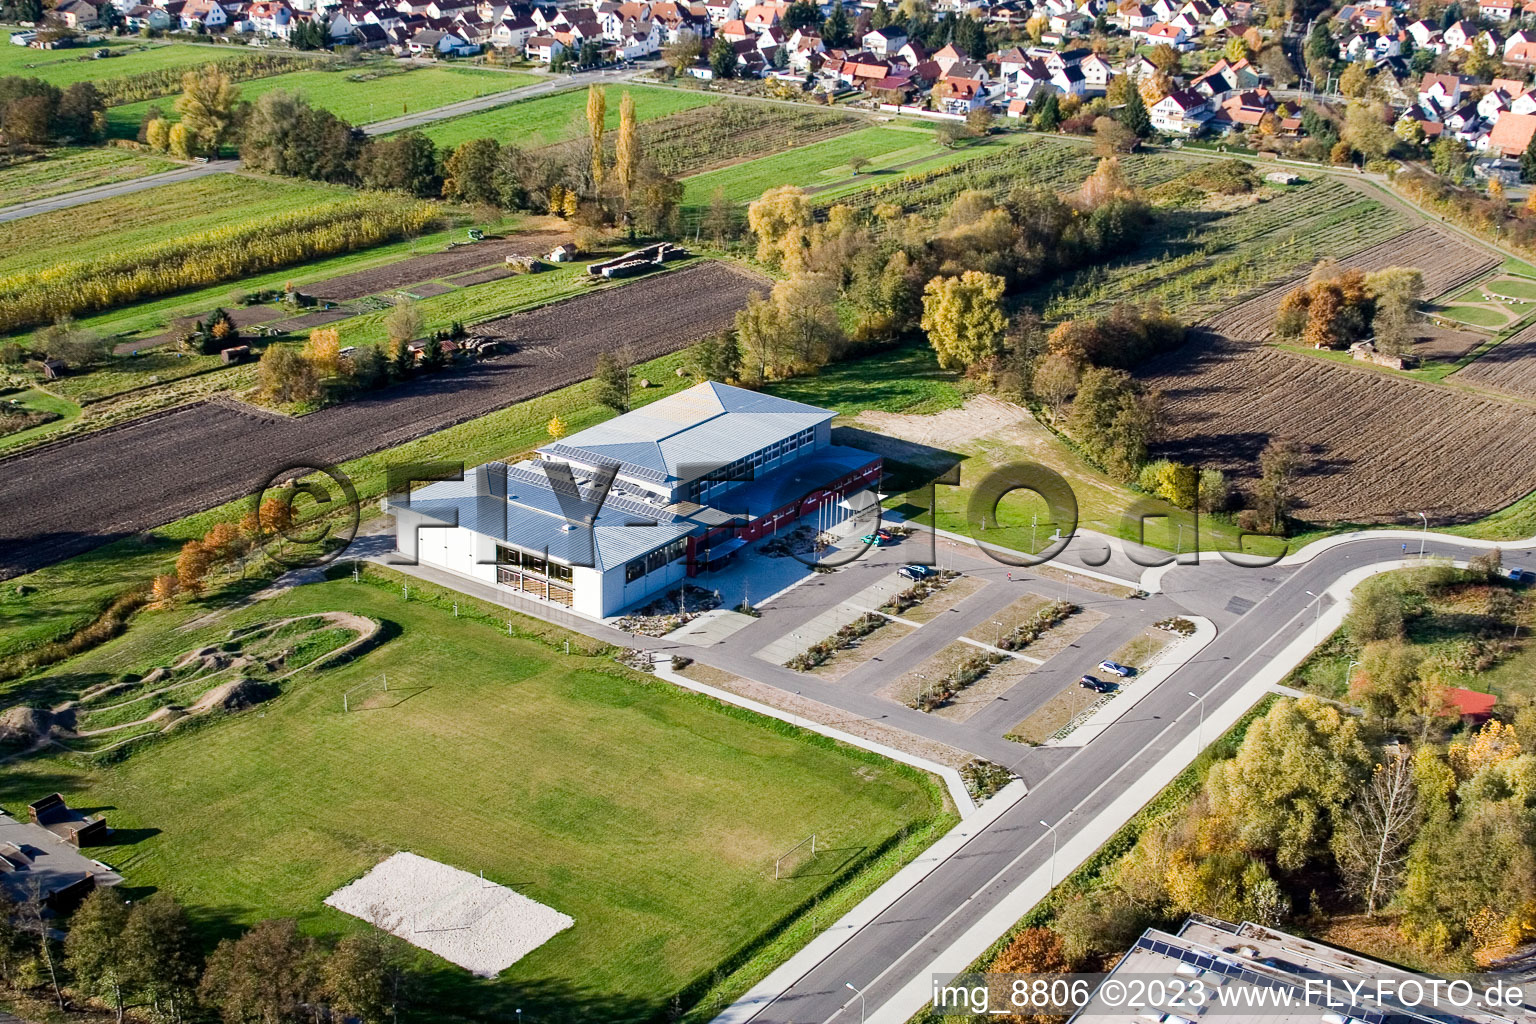 Bienwaldhalle in Kandel in the state Rhineland-Palatinate, Germany from above